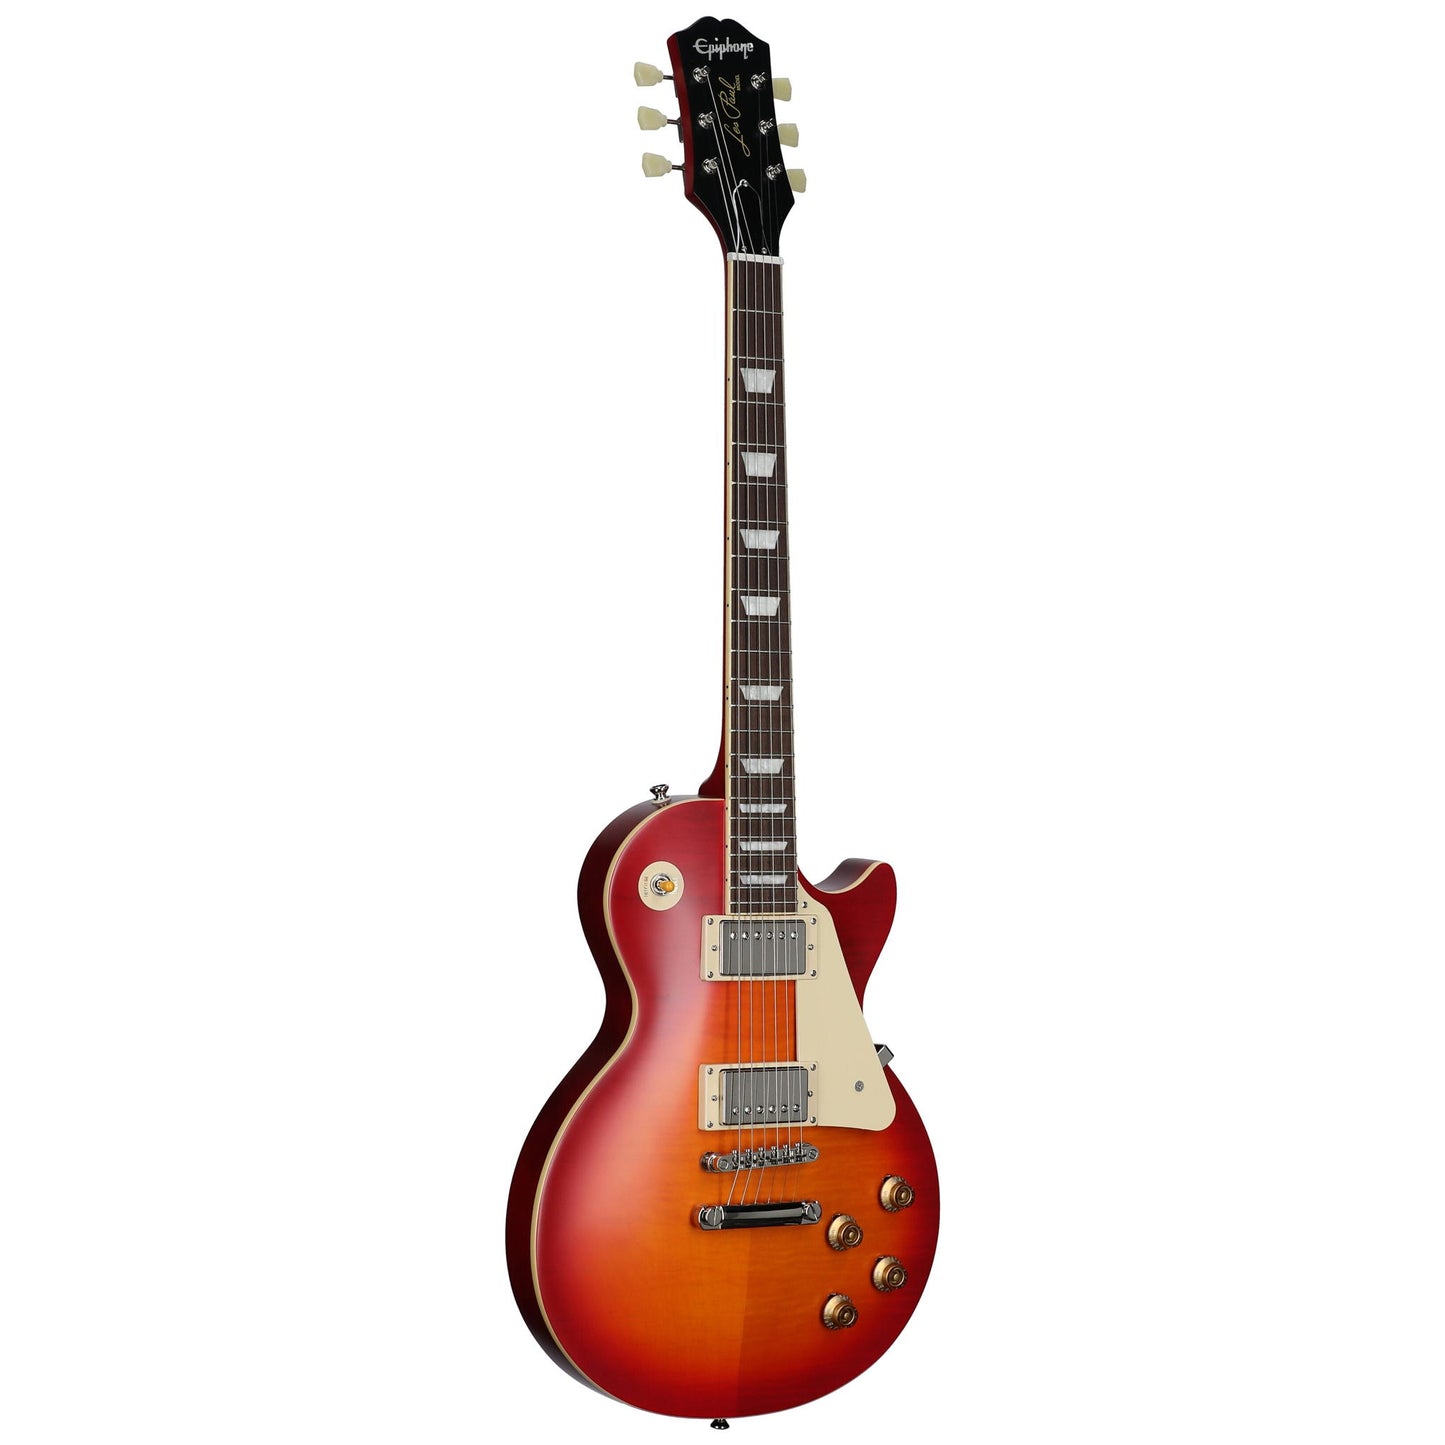 Epiphone 1959 Les Paul Standard Electric Guitar (with Case), Aged Dark Cherry Burst